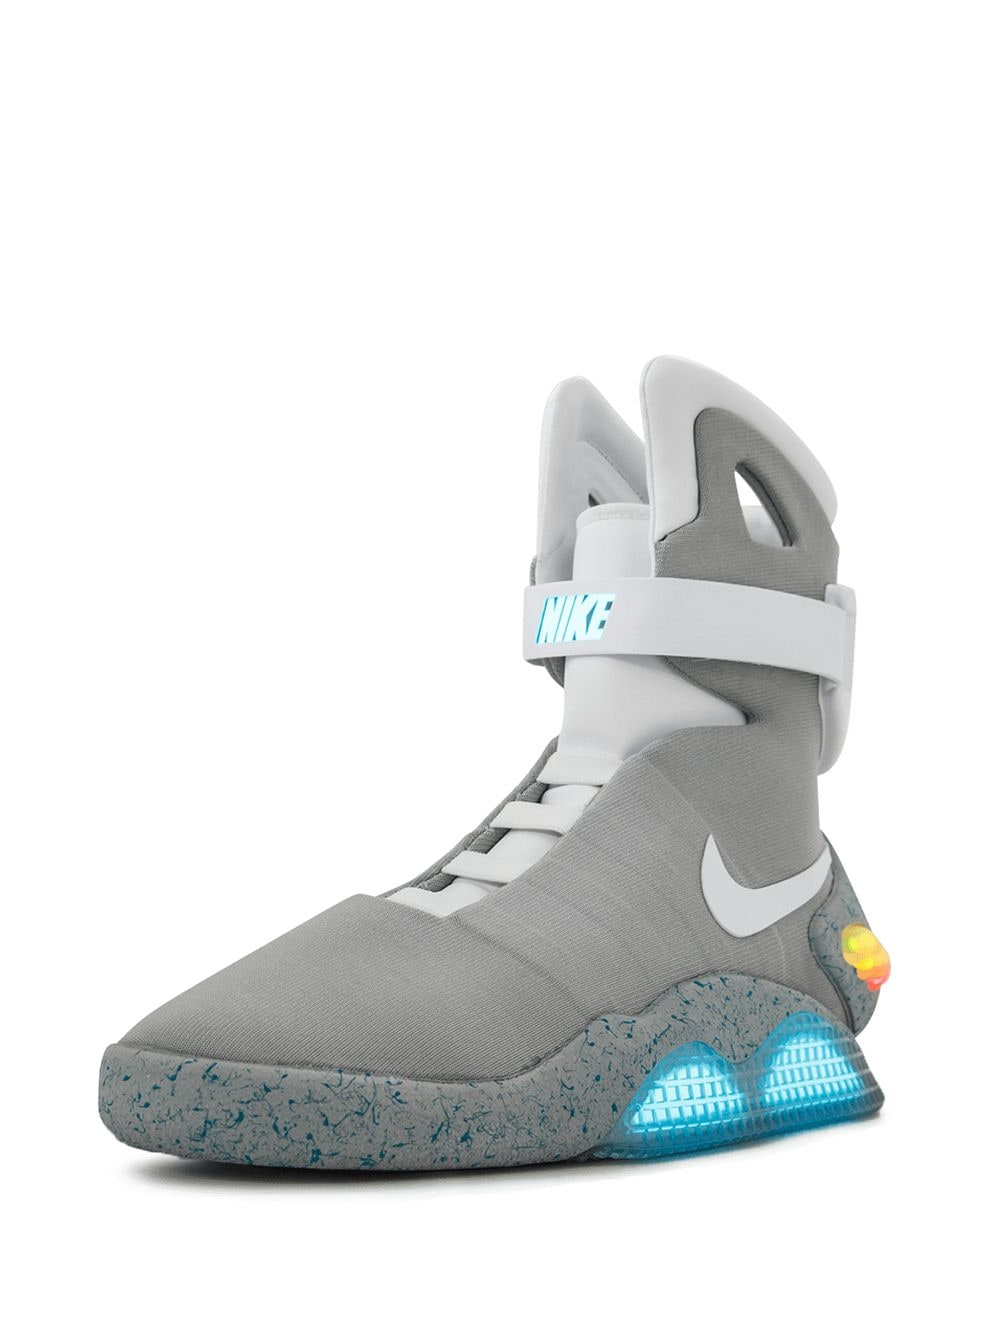 Nike MAG Back to the Future